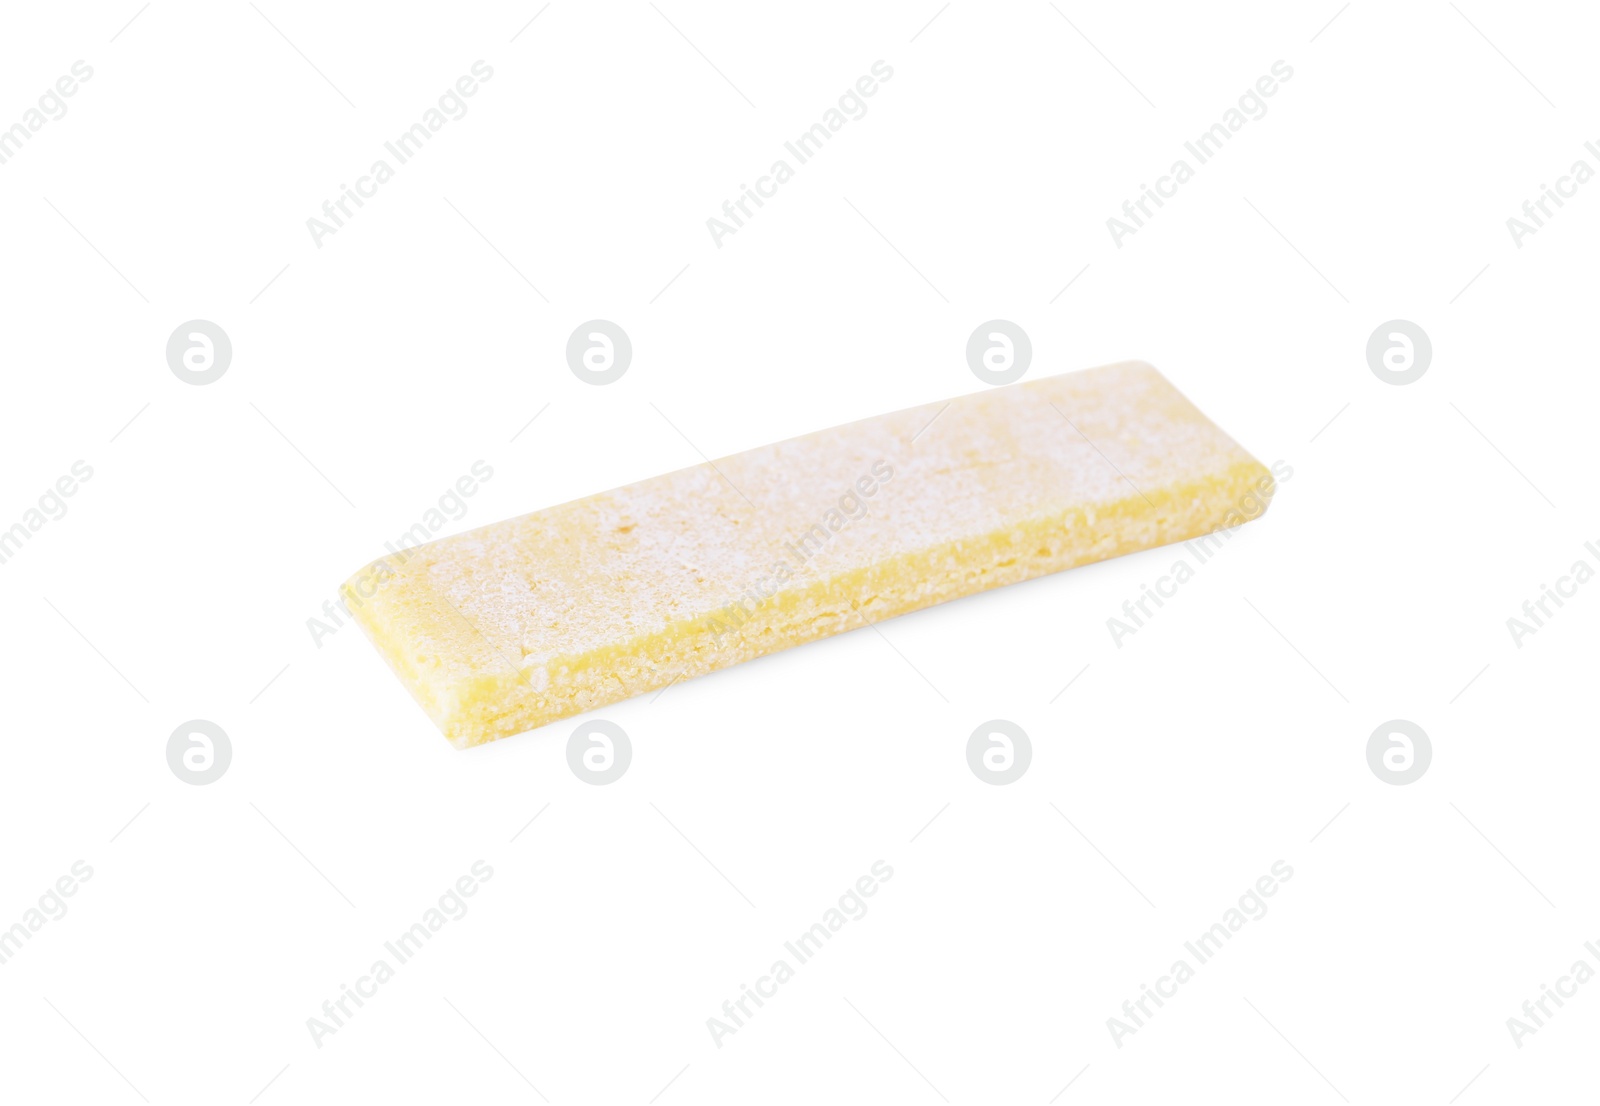 Photo of Stick of tasty chewing gum isolated on white